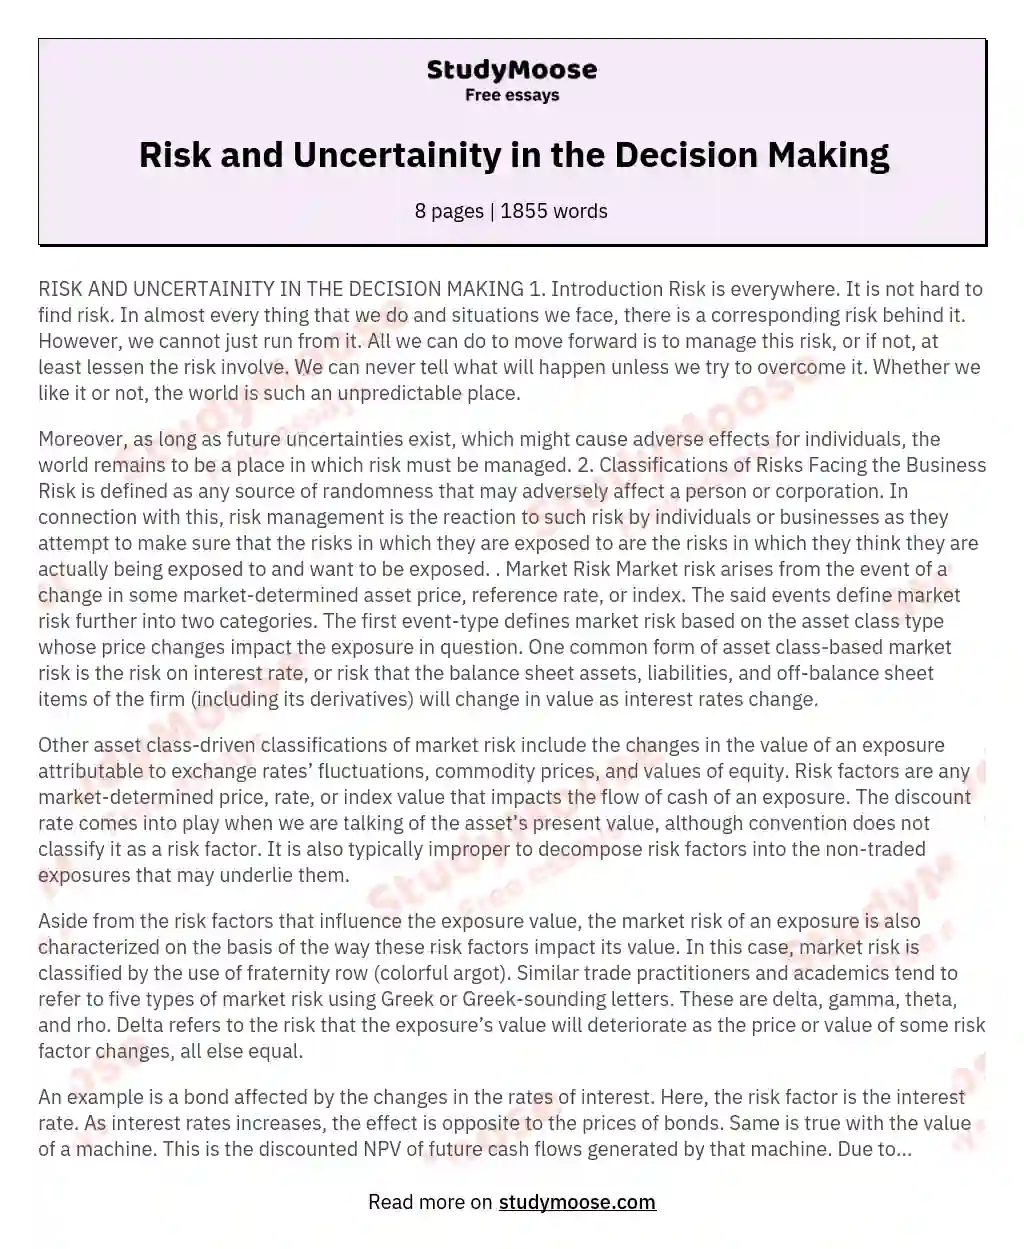 Risk and Uncertainity in the Decision Making essay